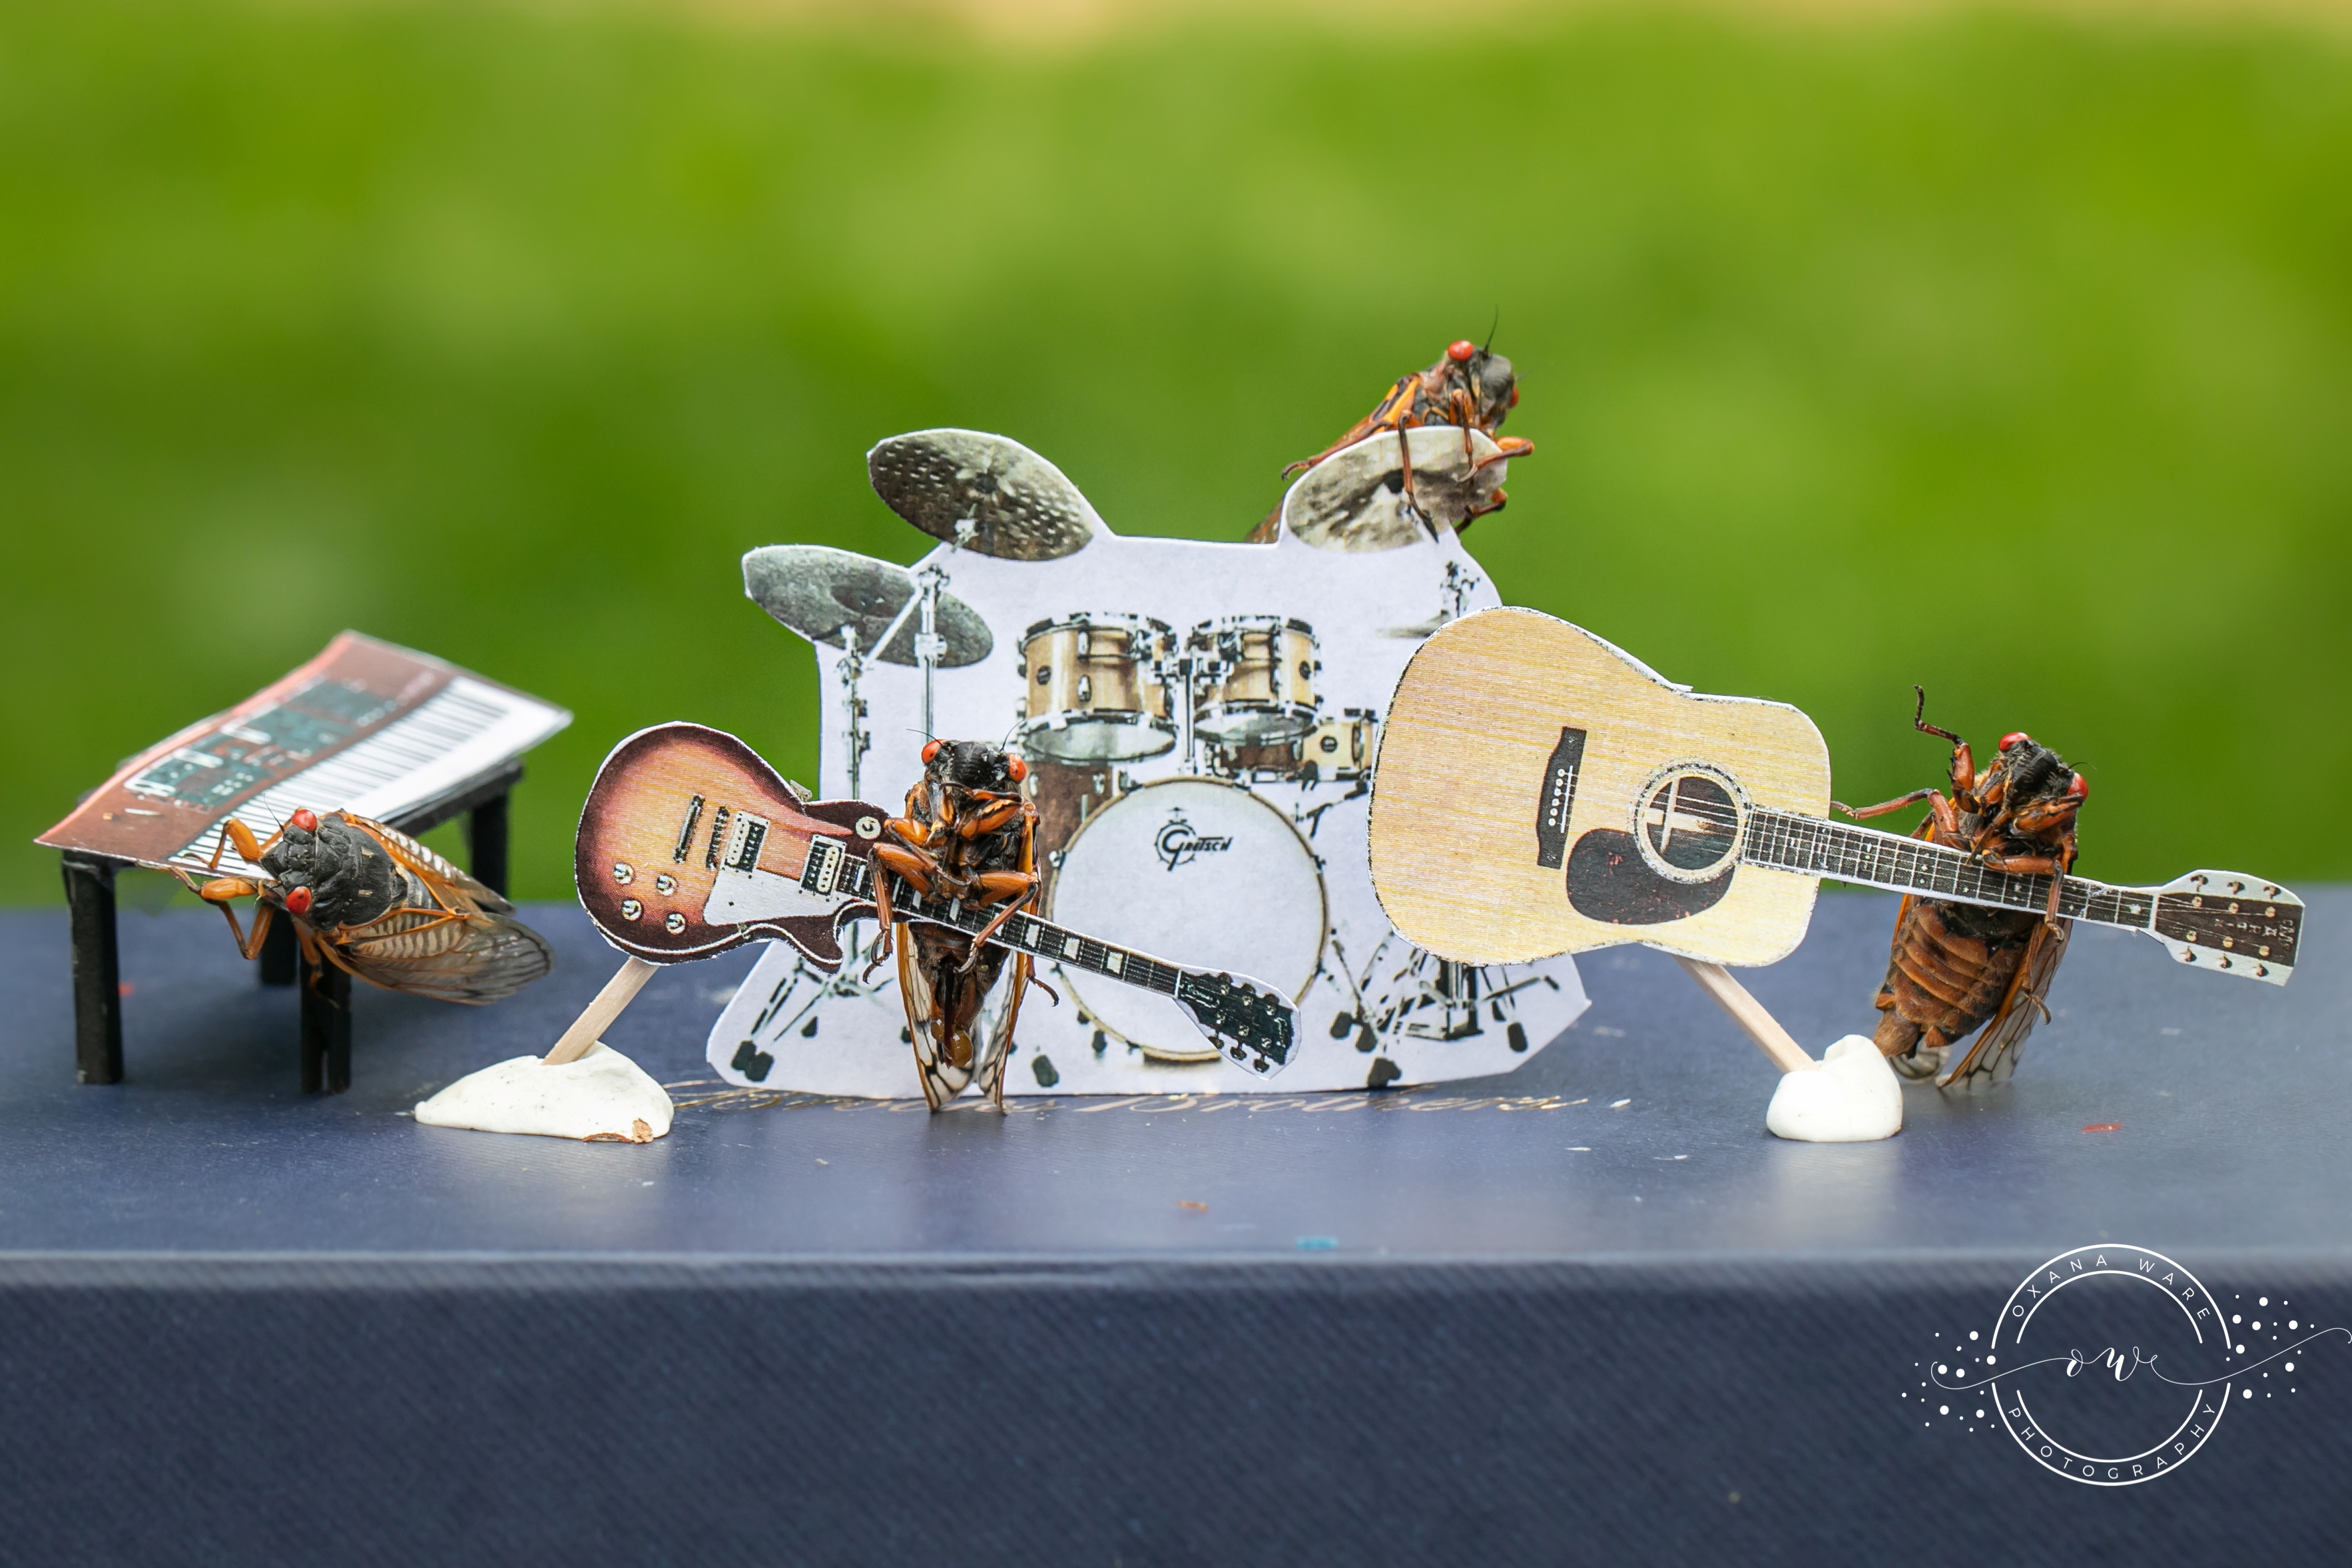 Cicadas make their Olympic debut in miniature art scenes Reuters